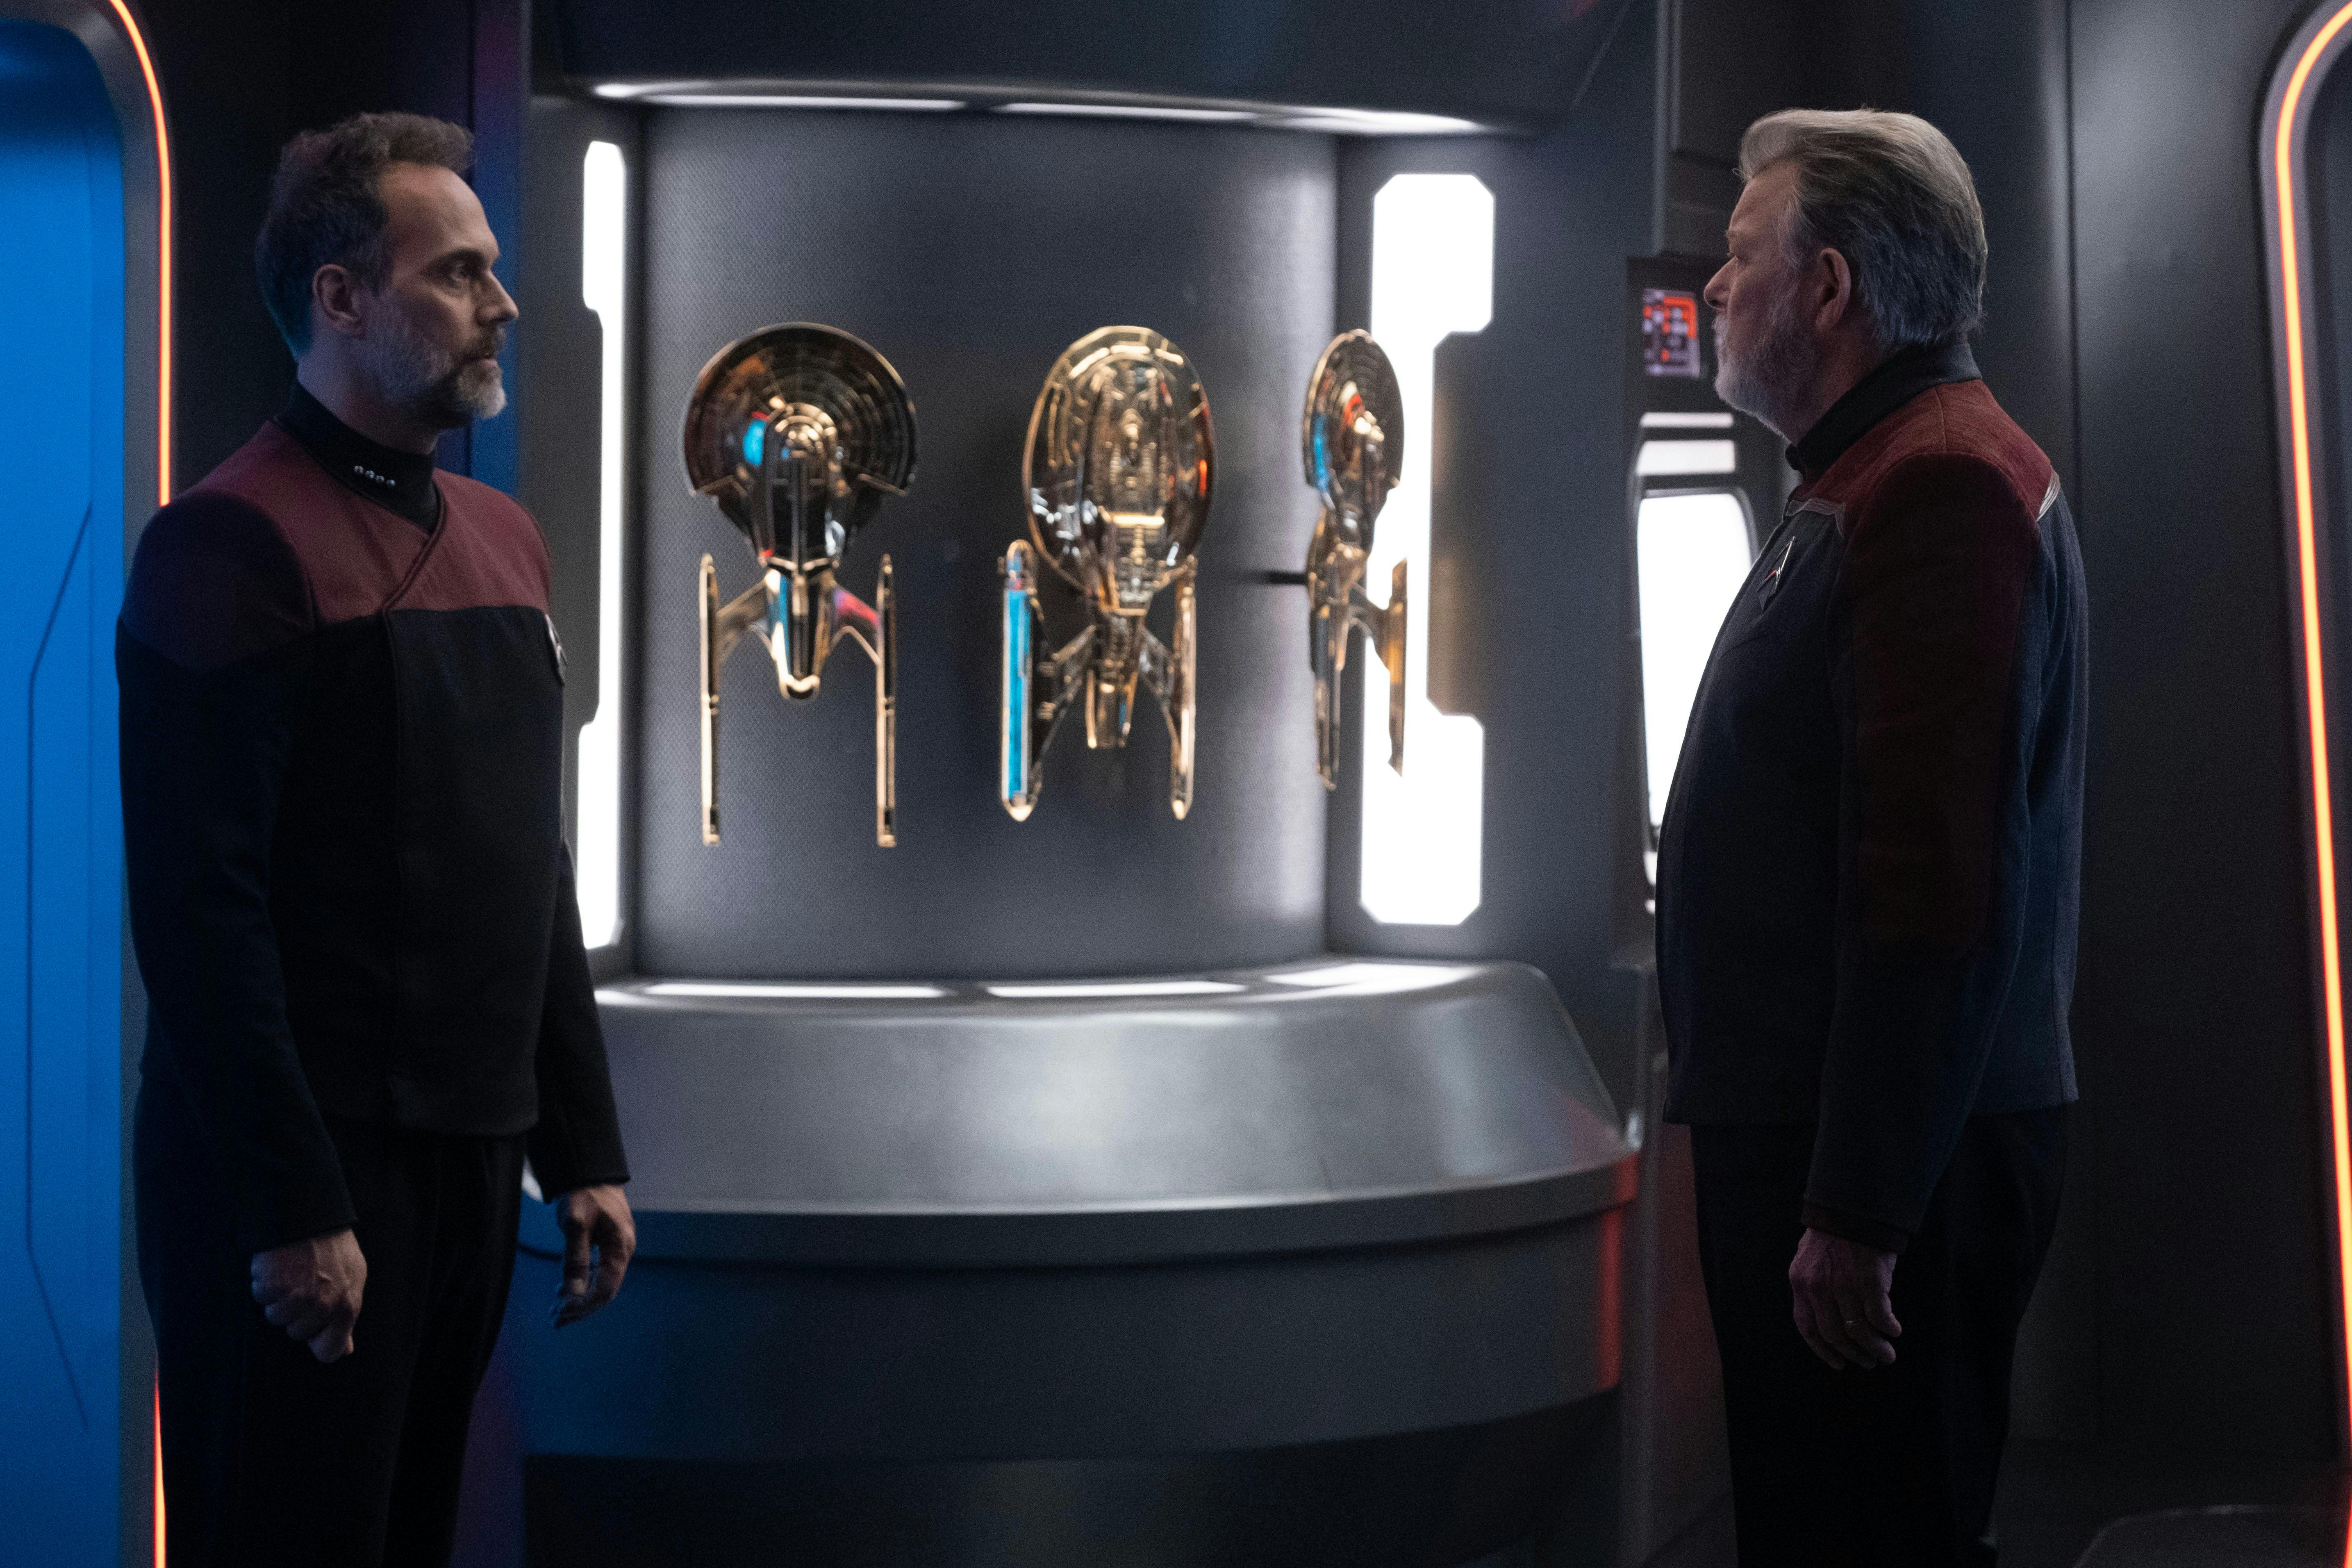 Captain Liam Shaw and Captain Will Riker stand face-to-face in front of a display of gold-plated starships on Star Trek: Picard